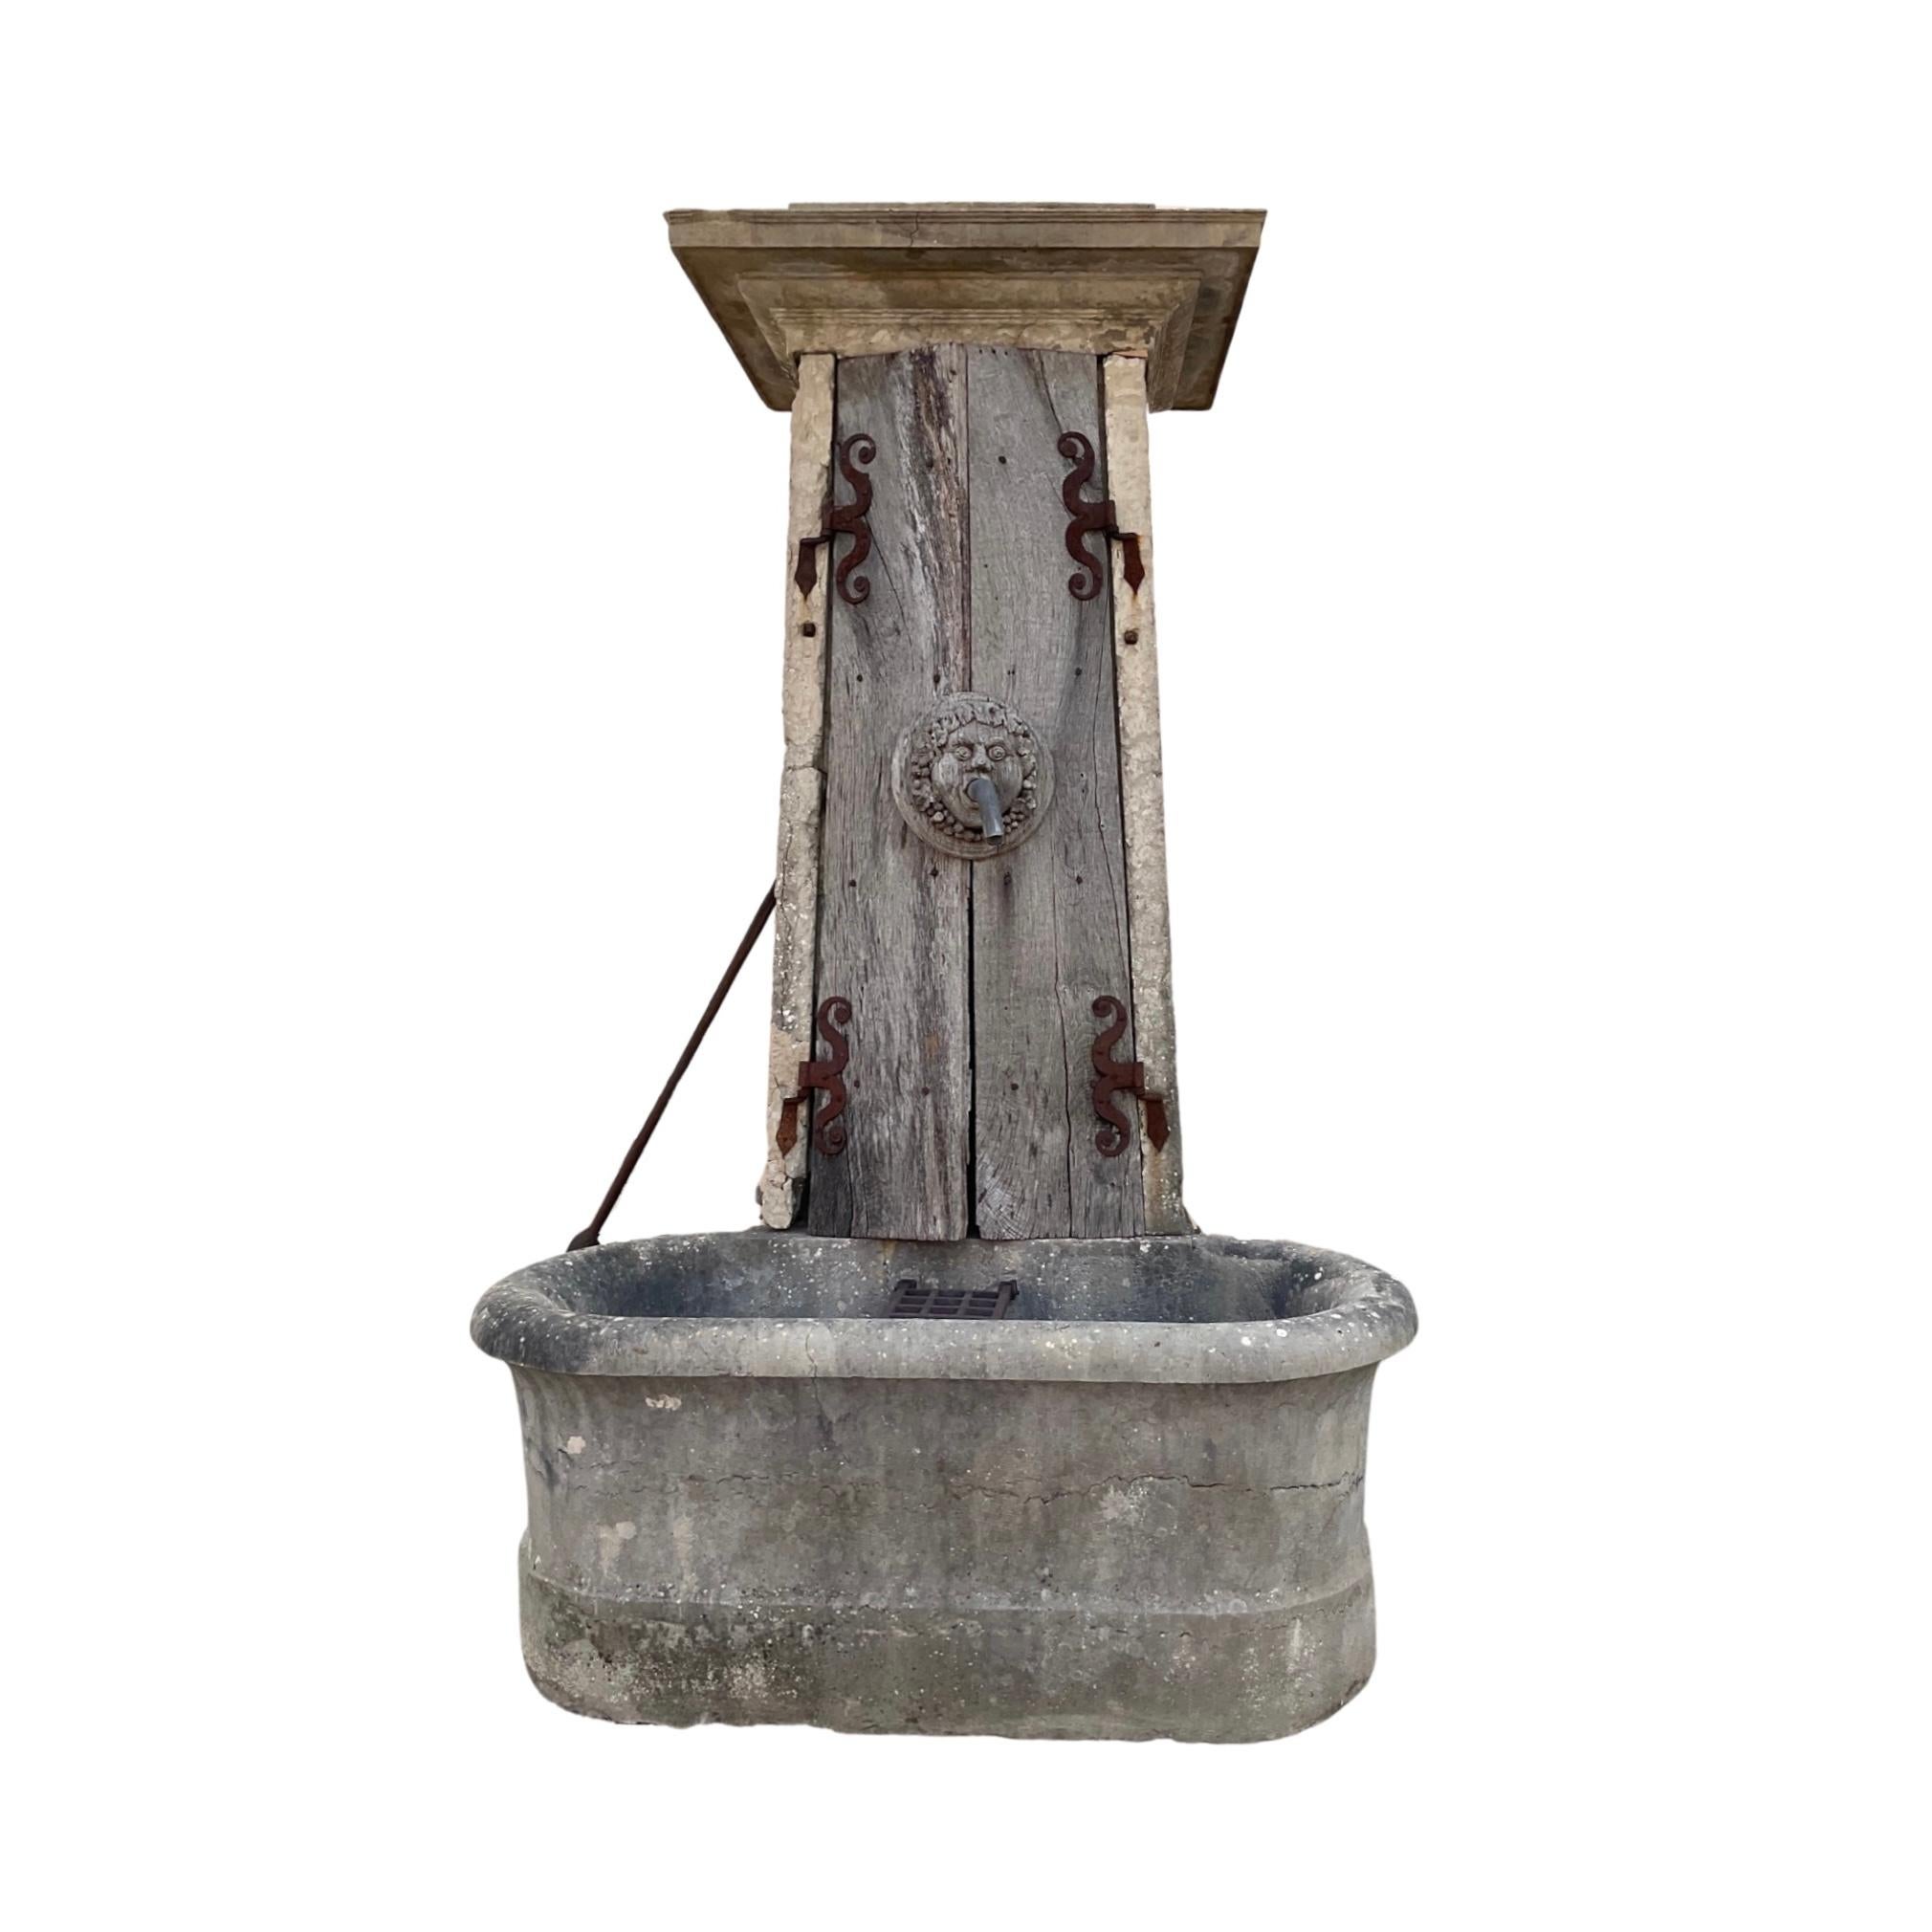 Bring the classic beauty of France to any outdoor space with this French Antique Limestone Fountain. Crafted out of hand-selected limestone, the fountain features a front basin tub and a handheld water bar pump for a timelessly elegant design. Enjoy